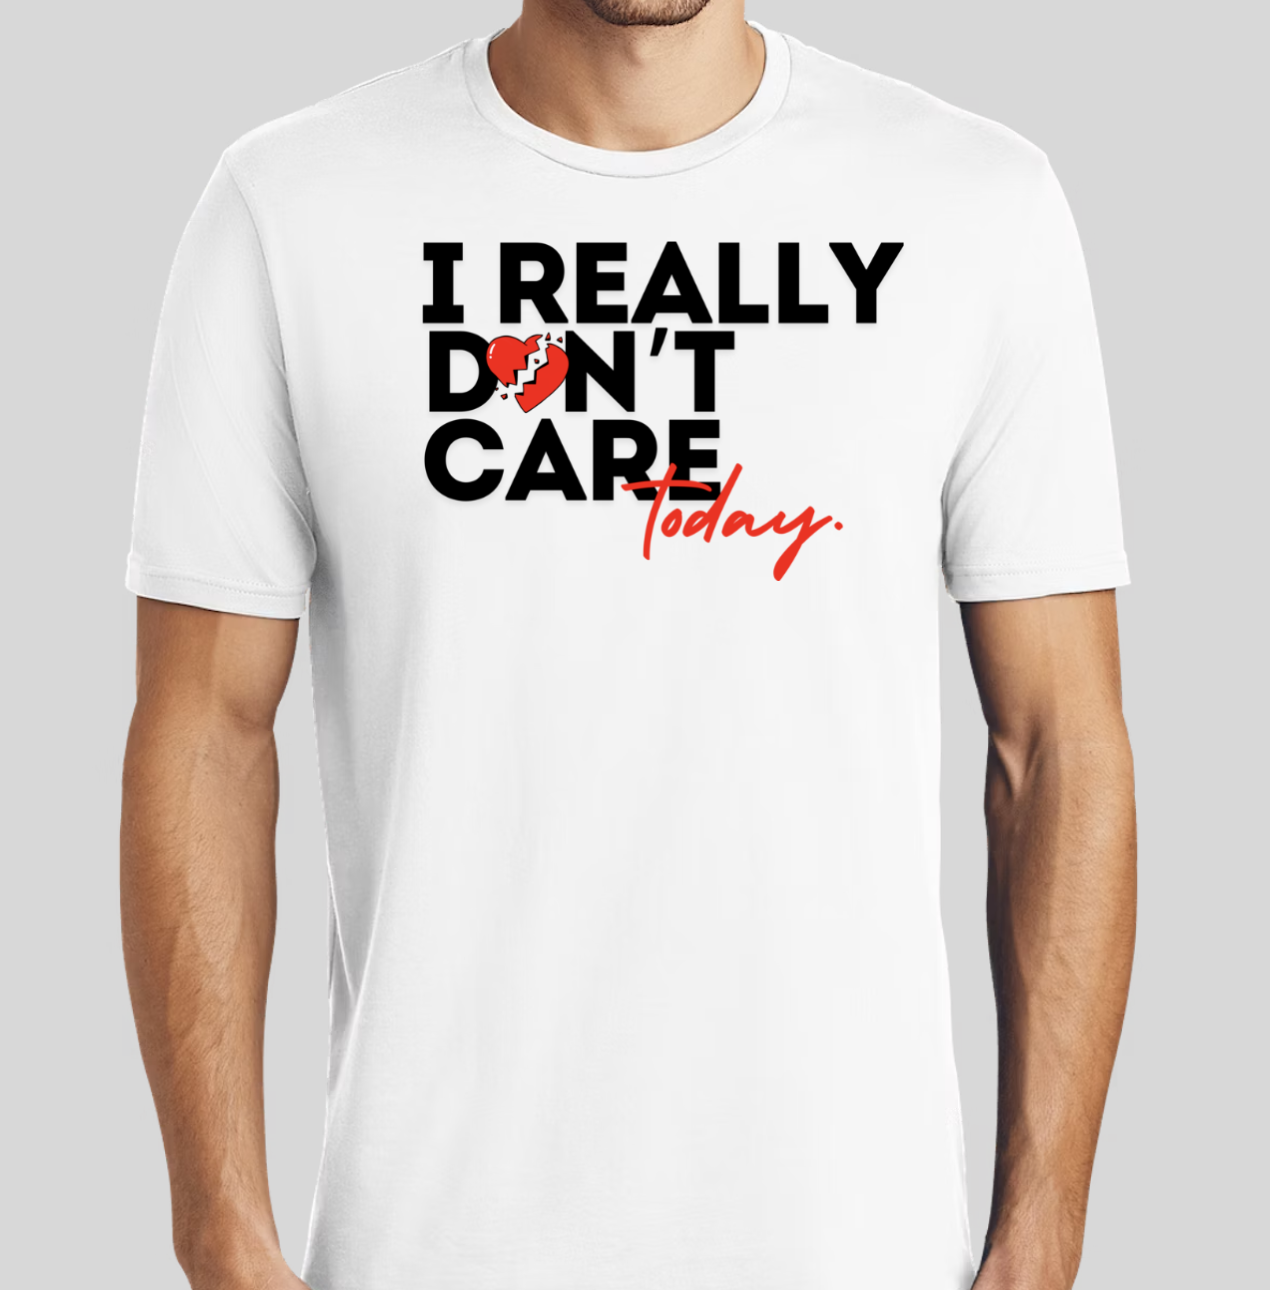 The I Really Don't Care t-shirt features the classic BHS heart with a very care-free message. The slim BHS logo has been applied to the back of the t-shirt.